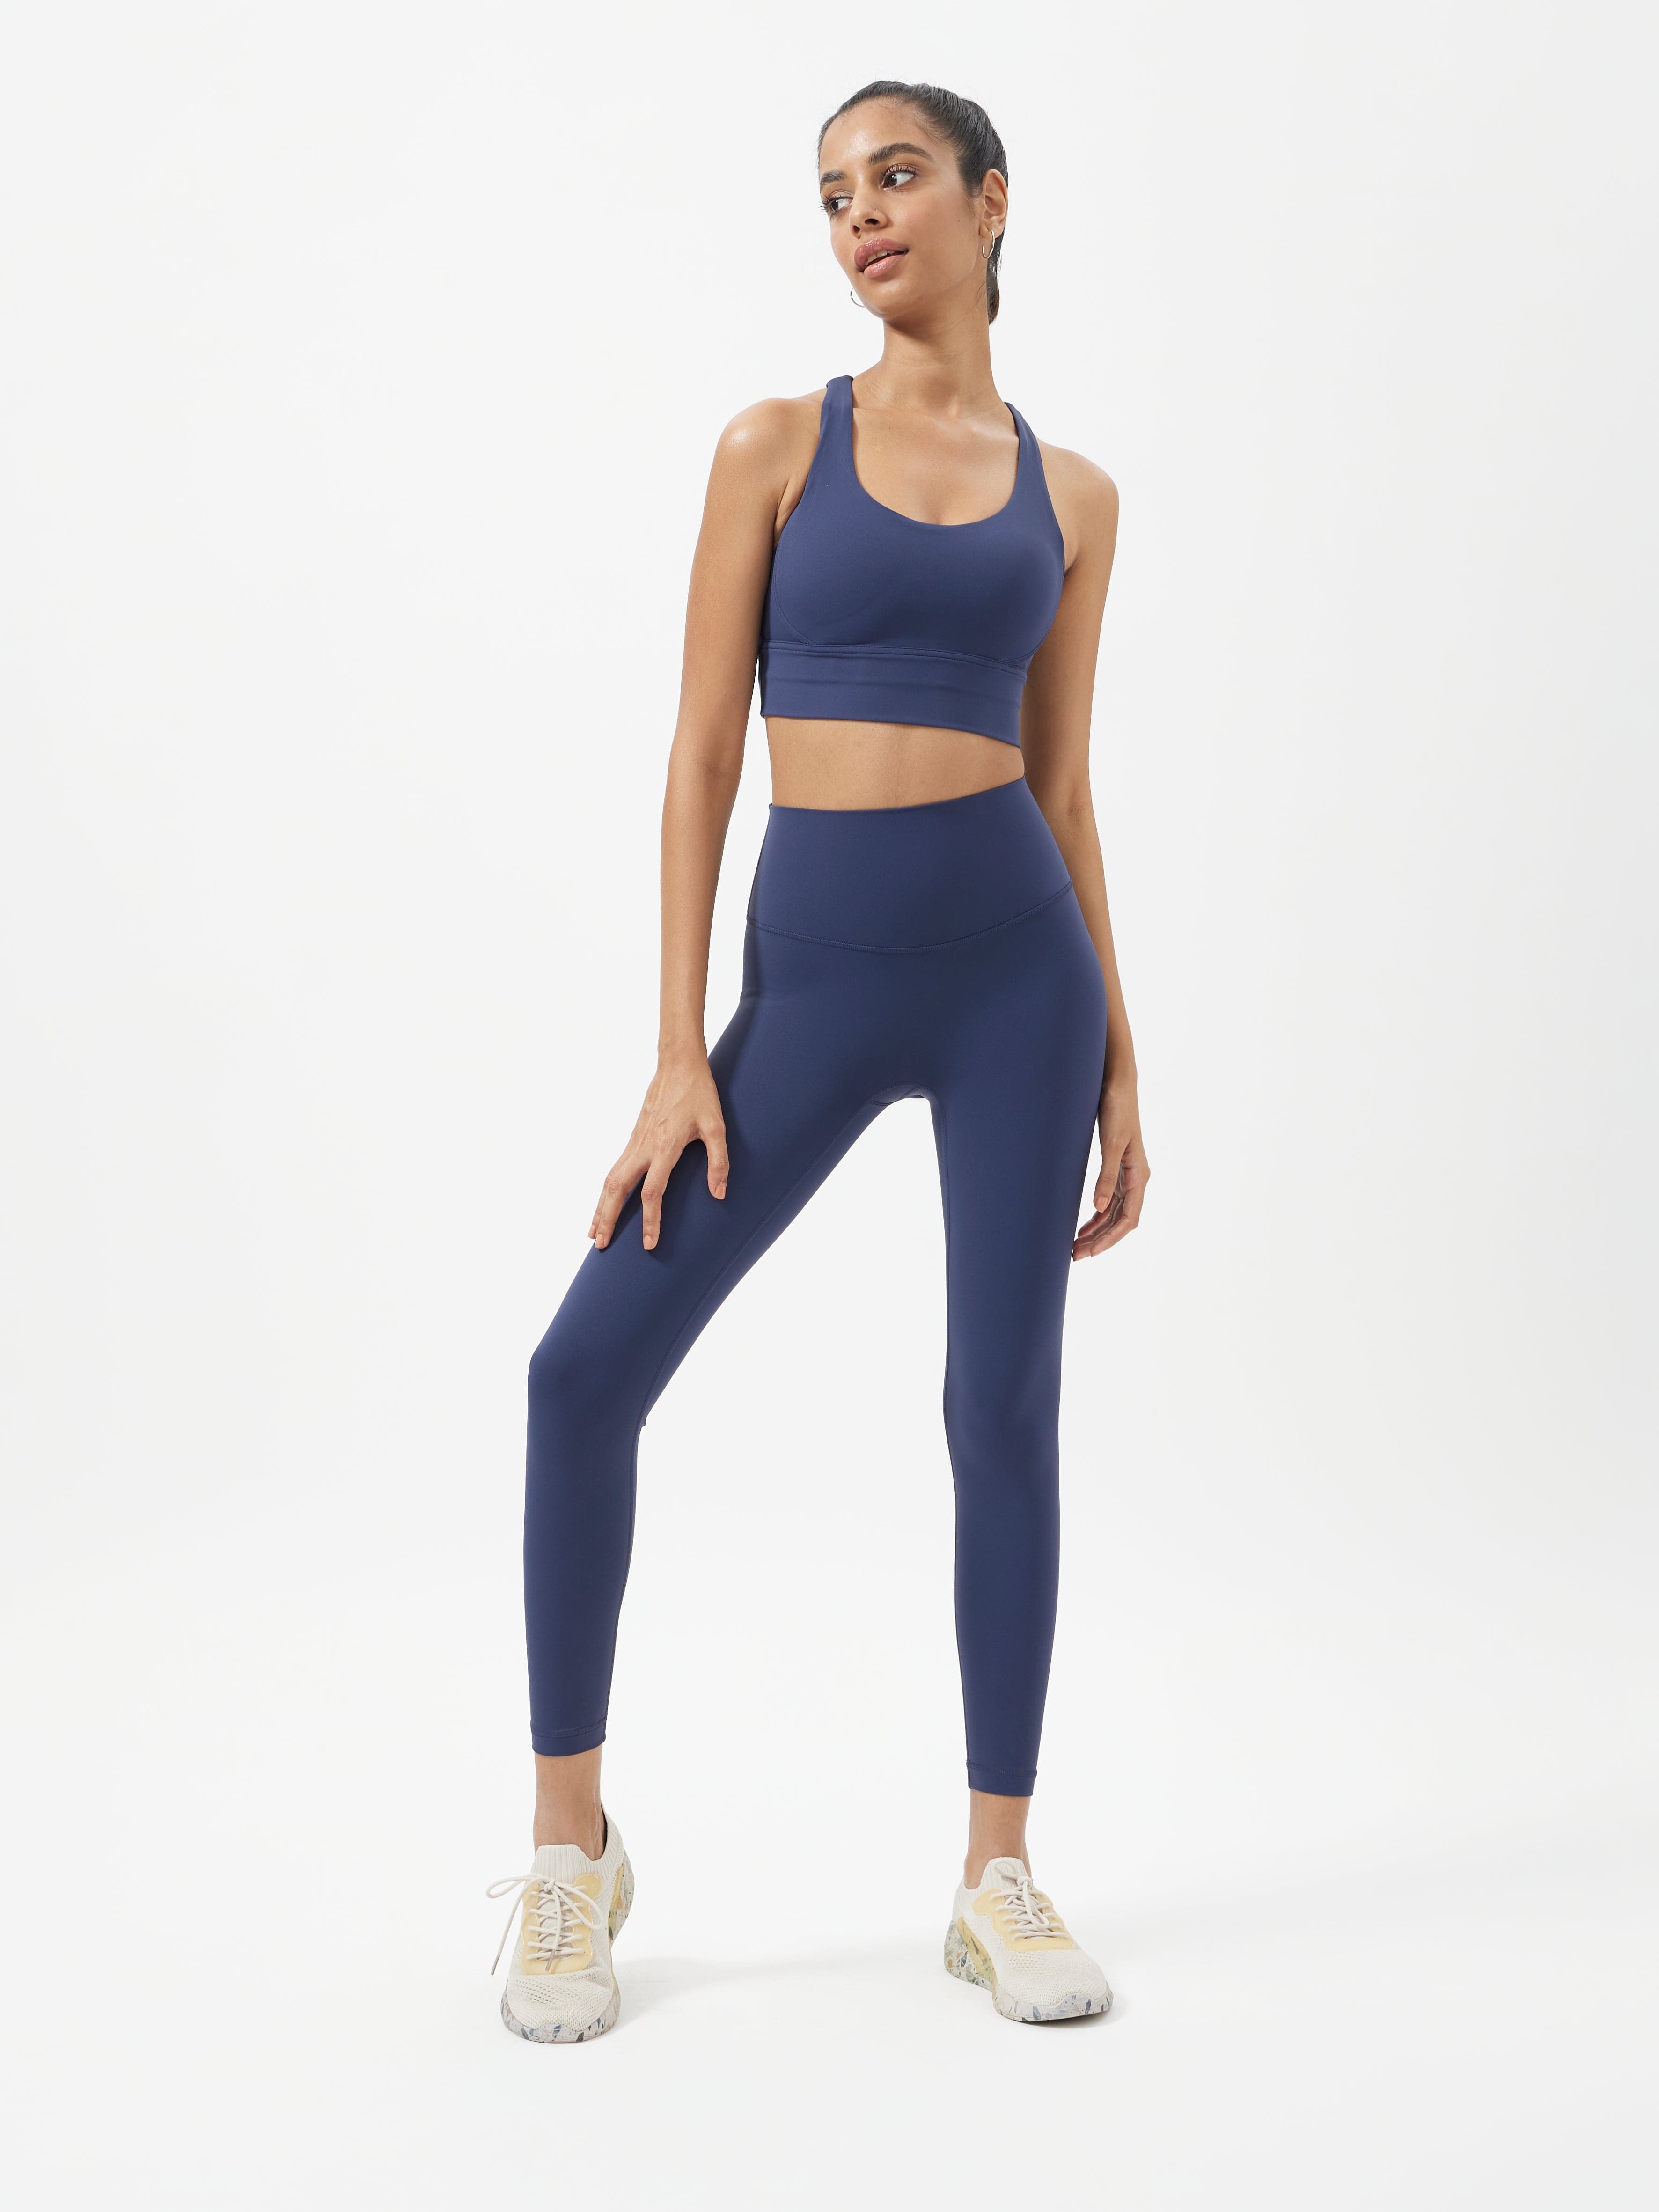 Shop for best workout clothes and gymwear for men and women at M&S